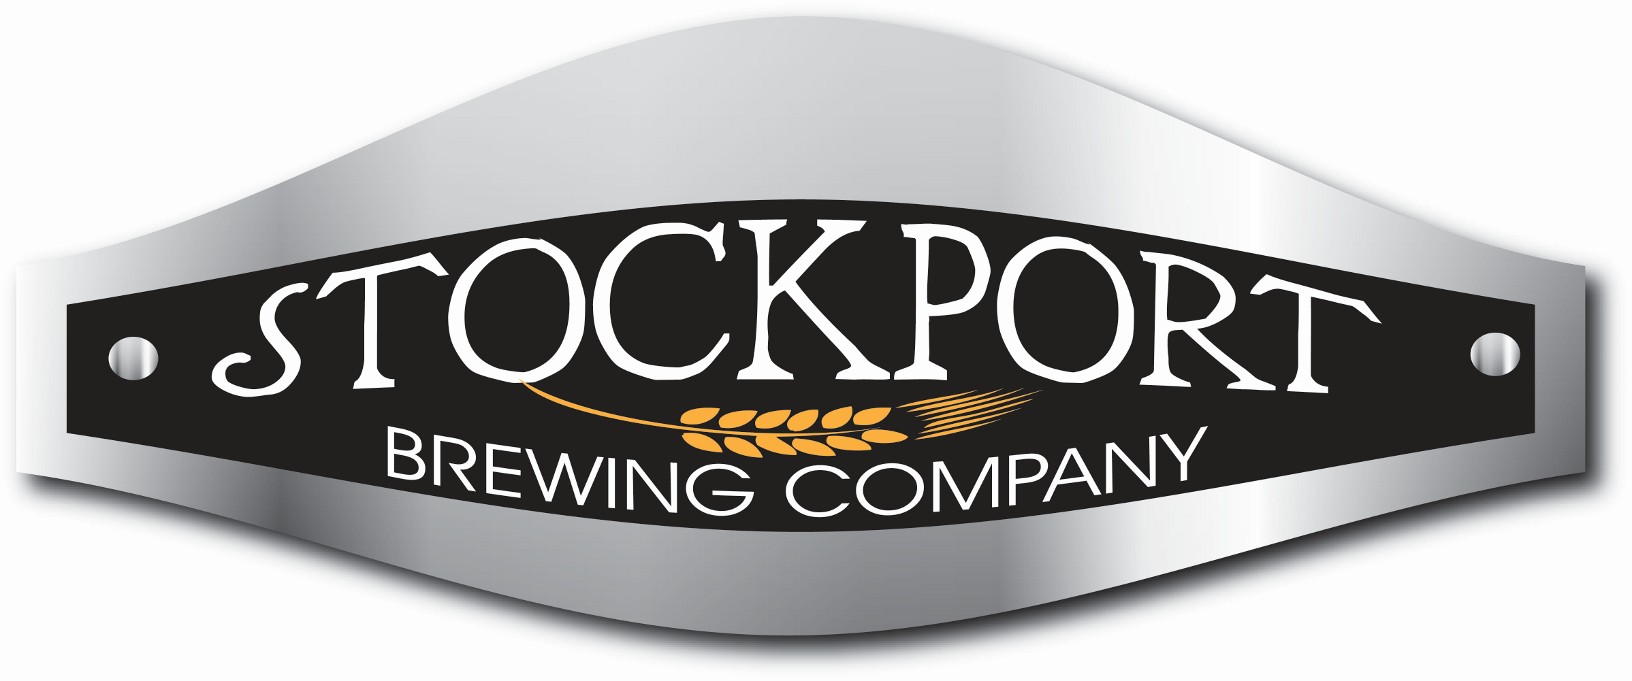 Website Sponsored by Stockport Brewing Company